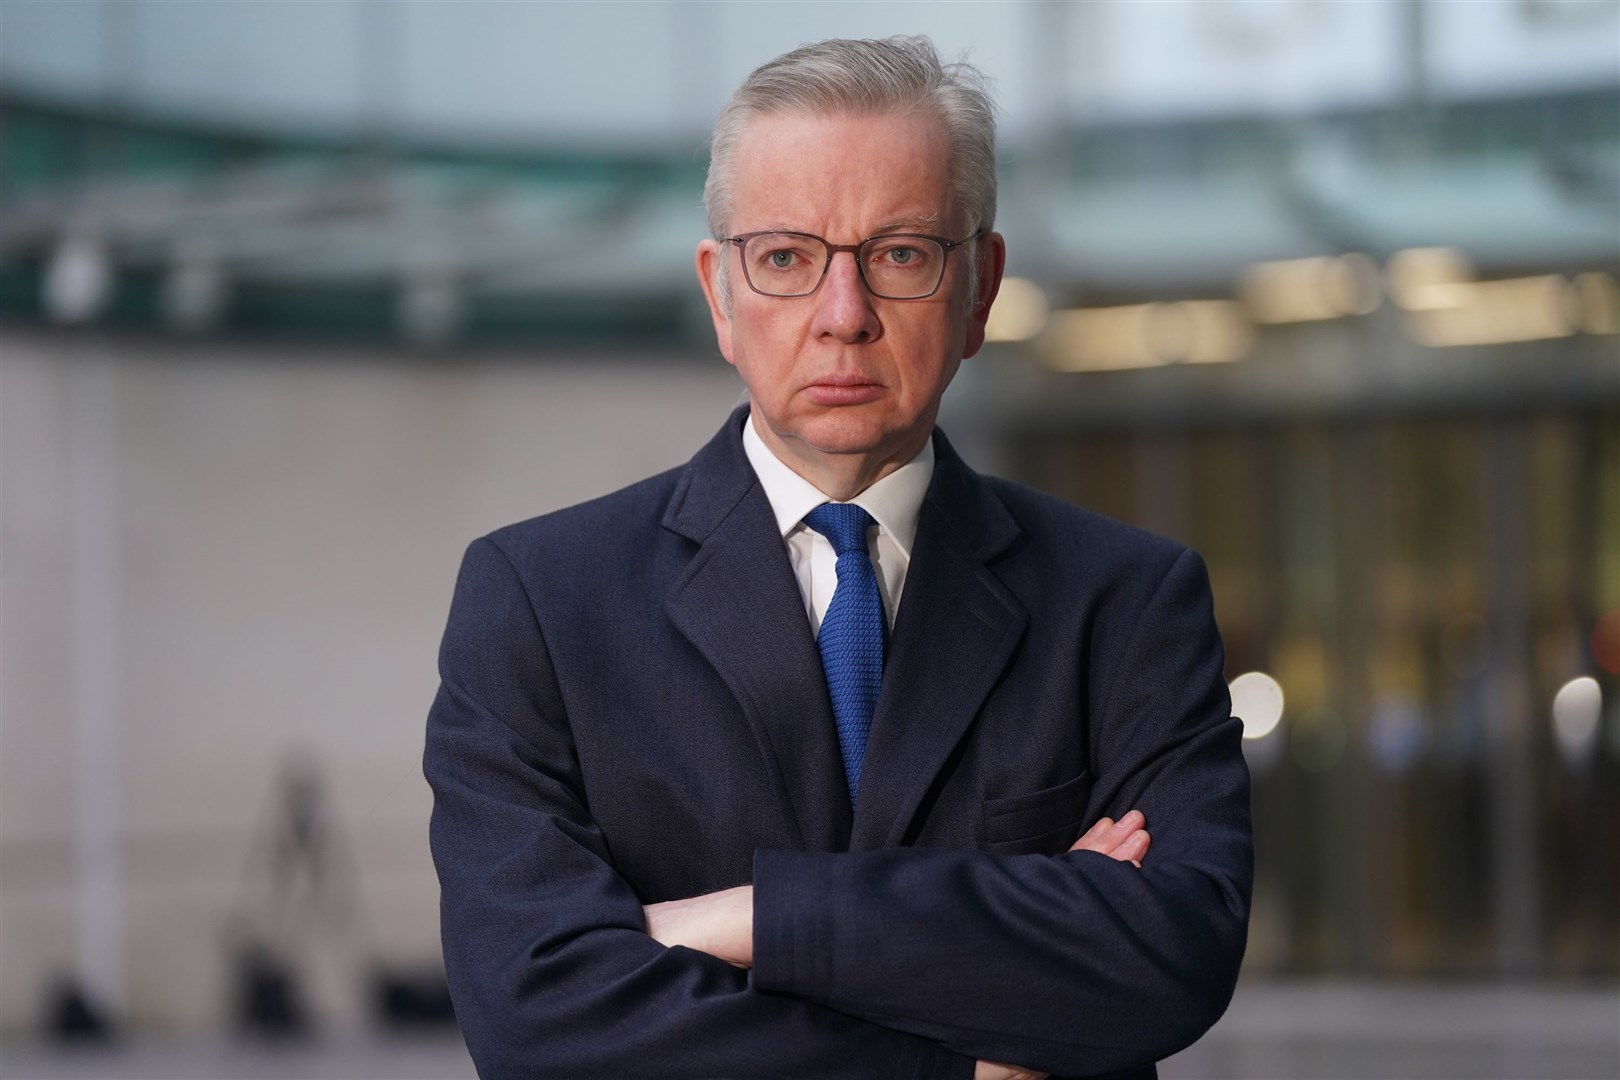 Housing Secretary Michael Gove said his aim is for the Section 21 ban to come in before the general election (Lucy North/PA)